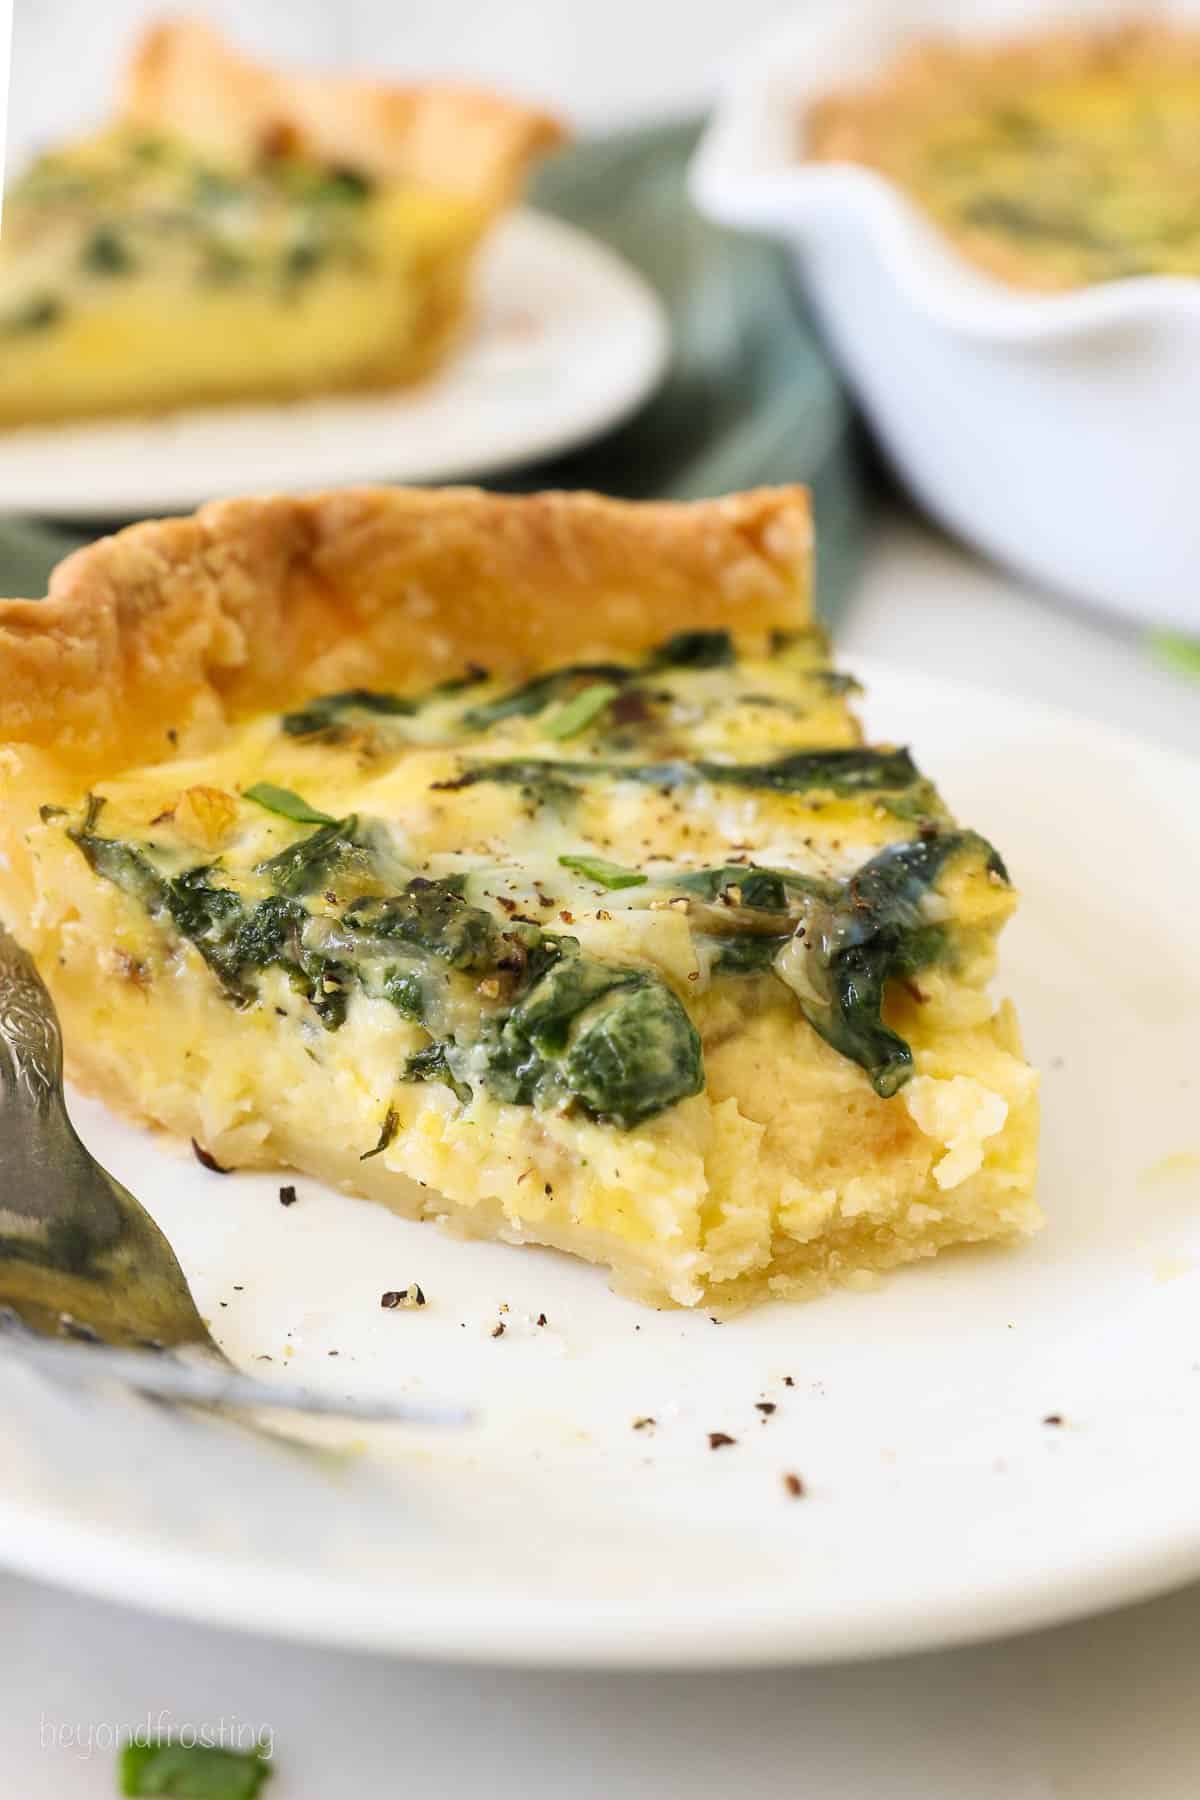 A slice of quiche florentine with a bite missing